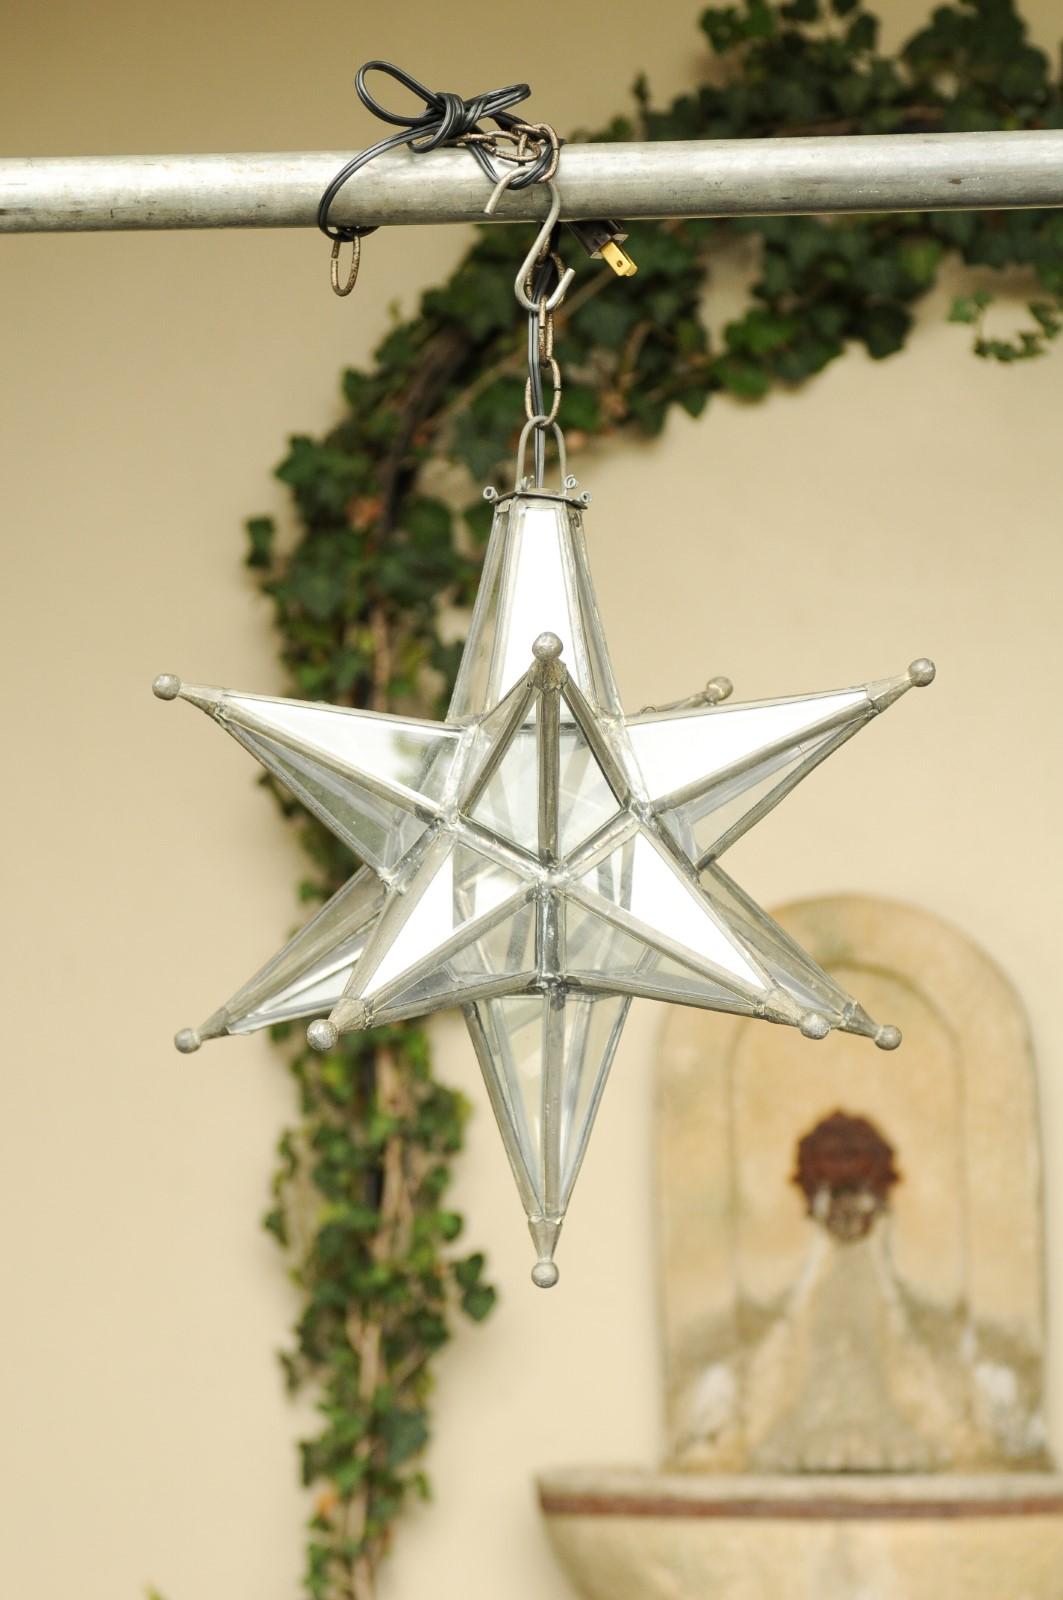 A vintage French star light fixture from the midcentury modern, with lead glass panels and metal frame. This French light fixture features an energizing star shape accented by a metal frame adorned with small spheres in the extremities which secure